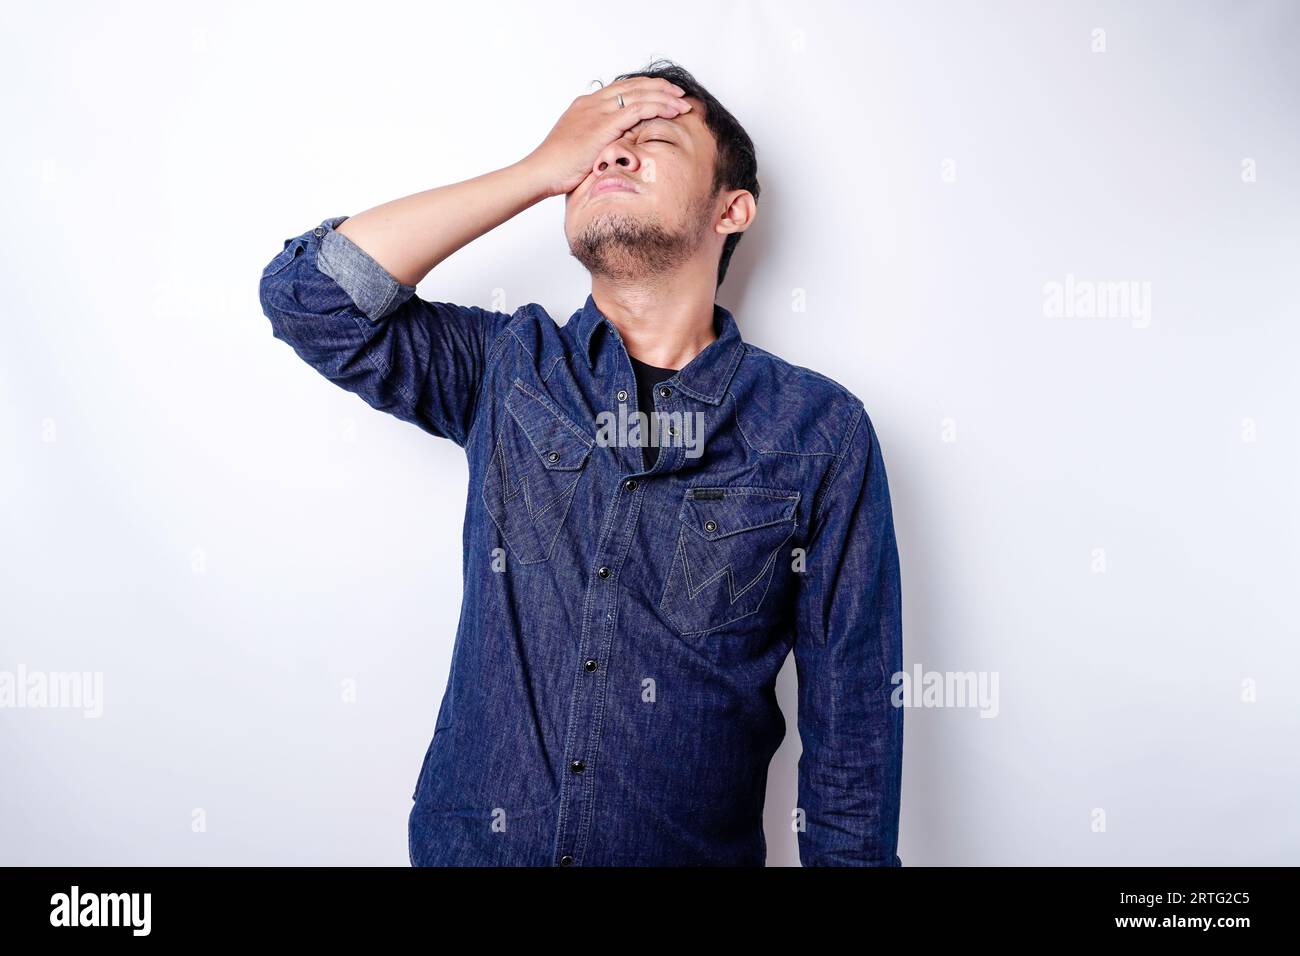 A portrait of an Asian man wearing a blue shirt isolated by white background looks depressed Stock Photo